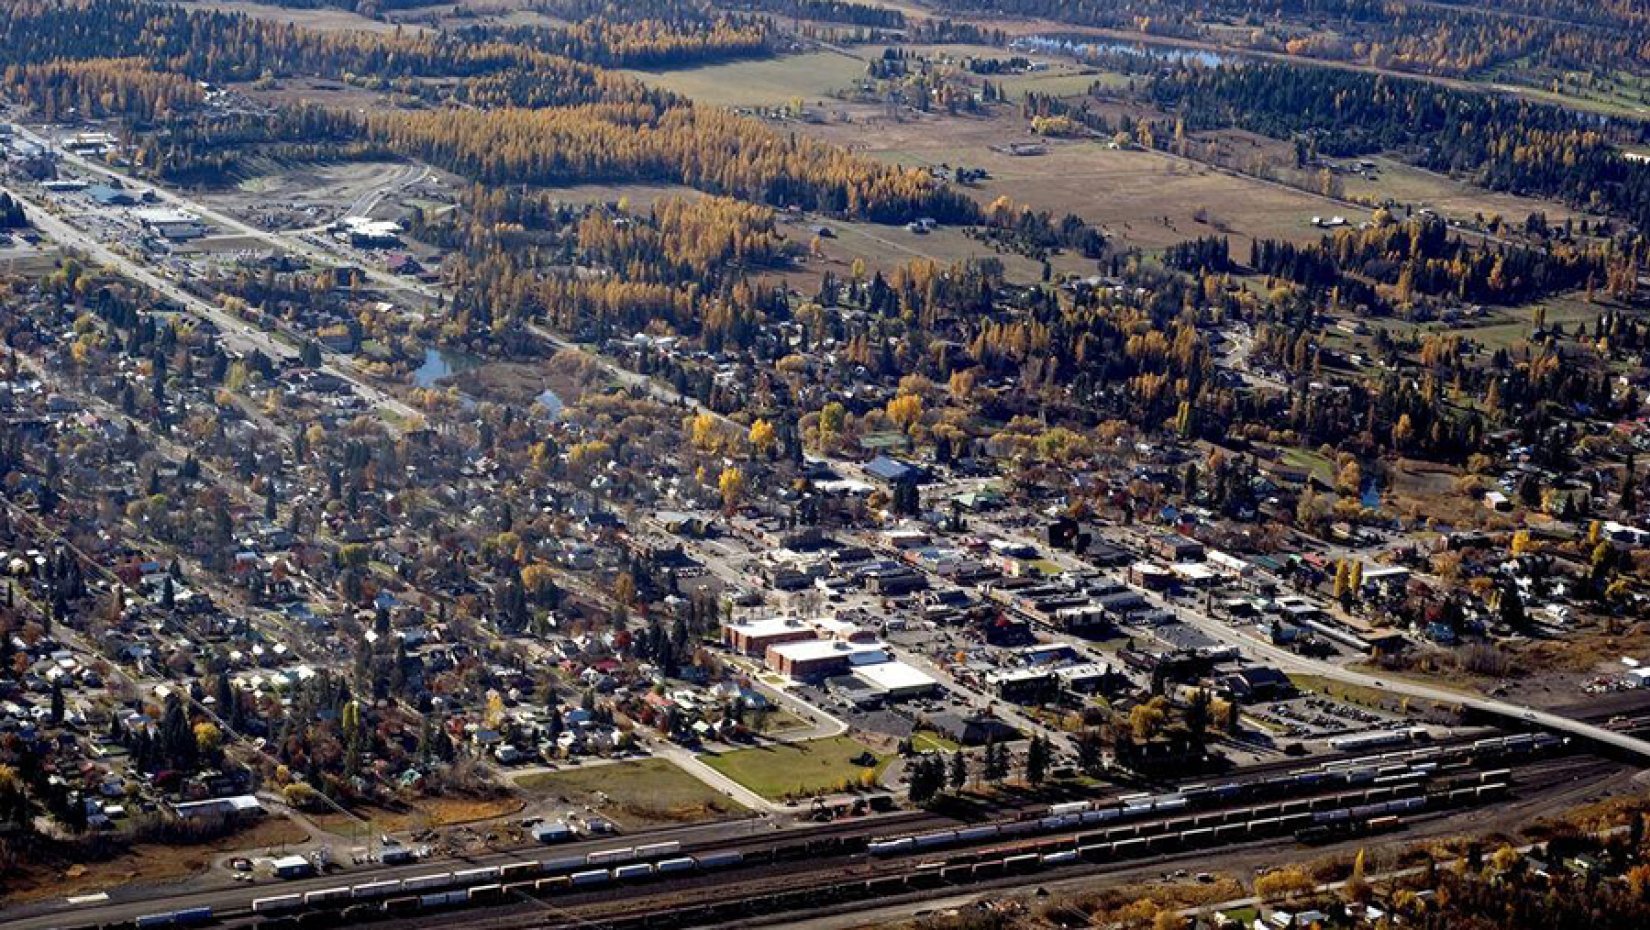 Aerial view of a small town in a forested area